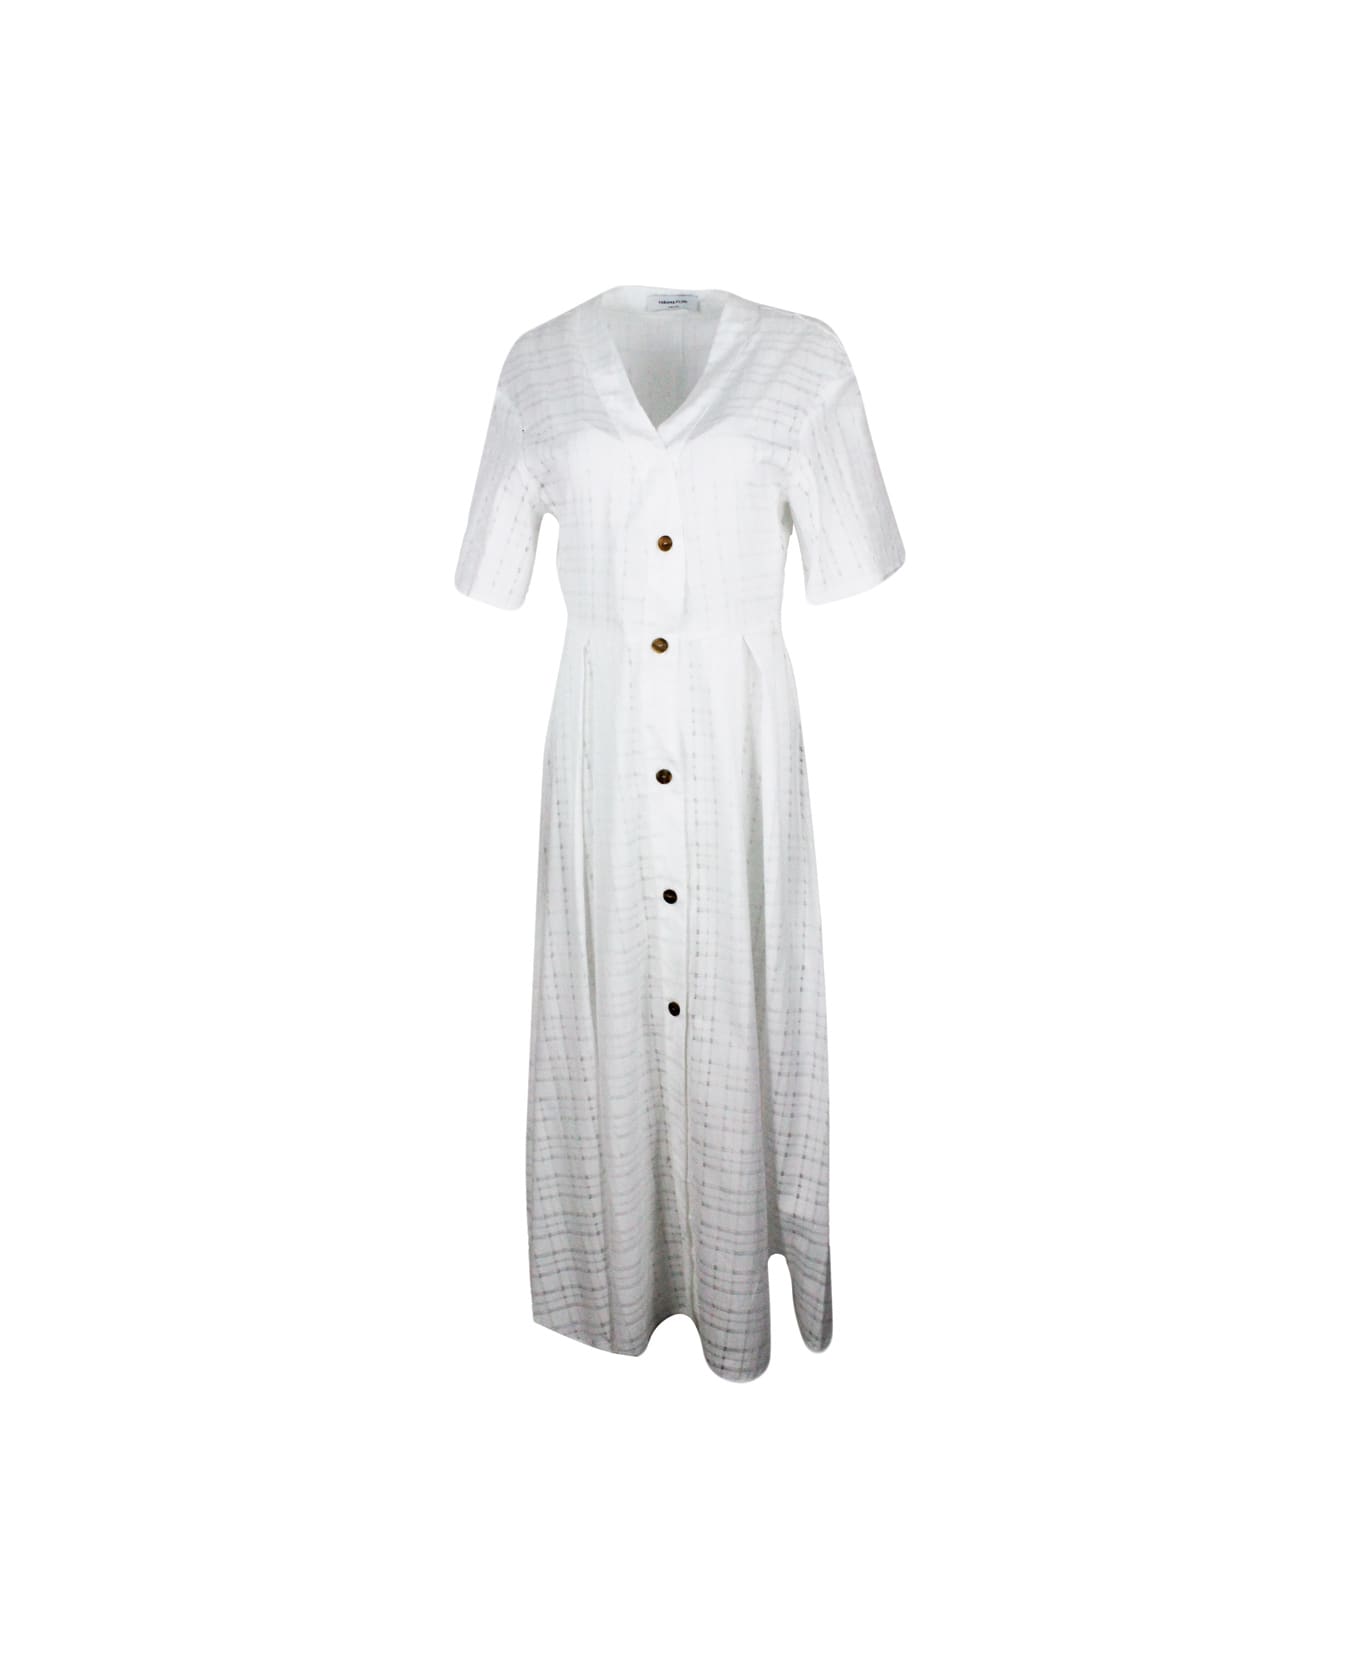 Fabiana Filippi Long Dress In Short-sleeved Stretch Cotton With Button Closure And Textured Work - White